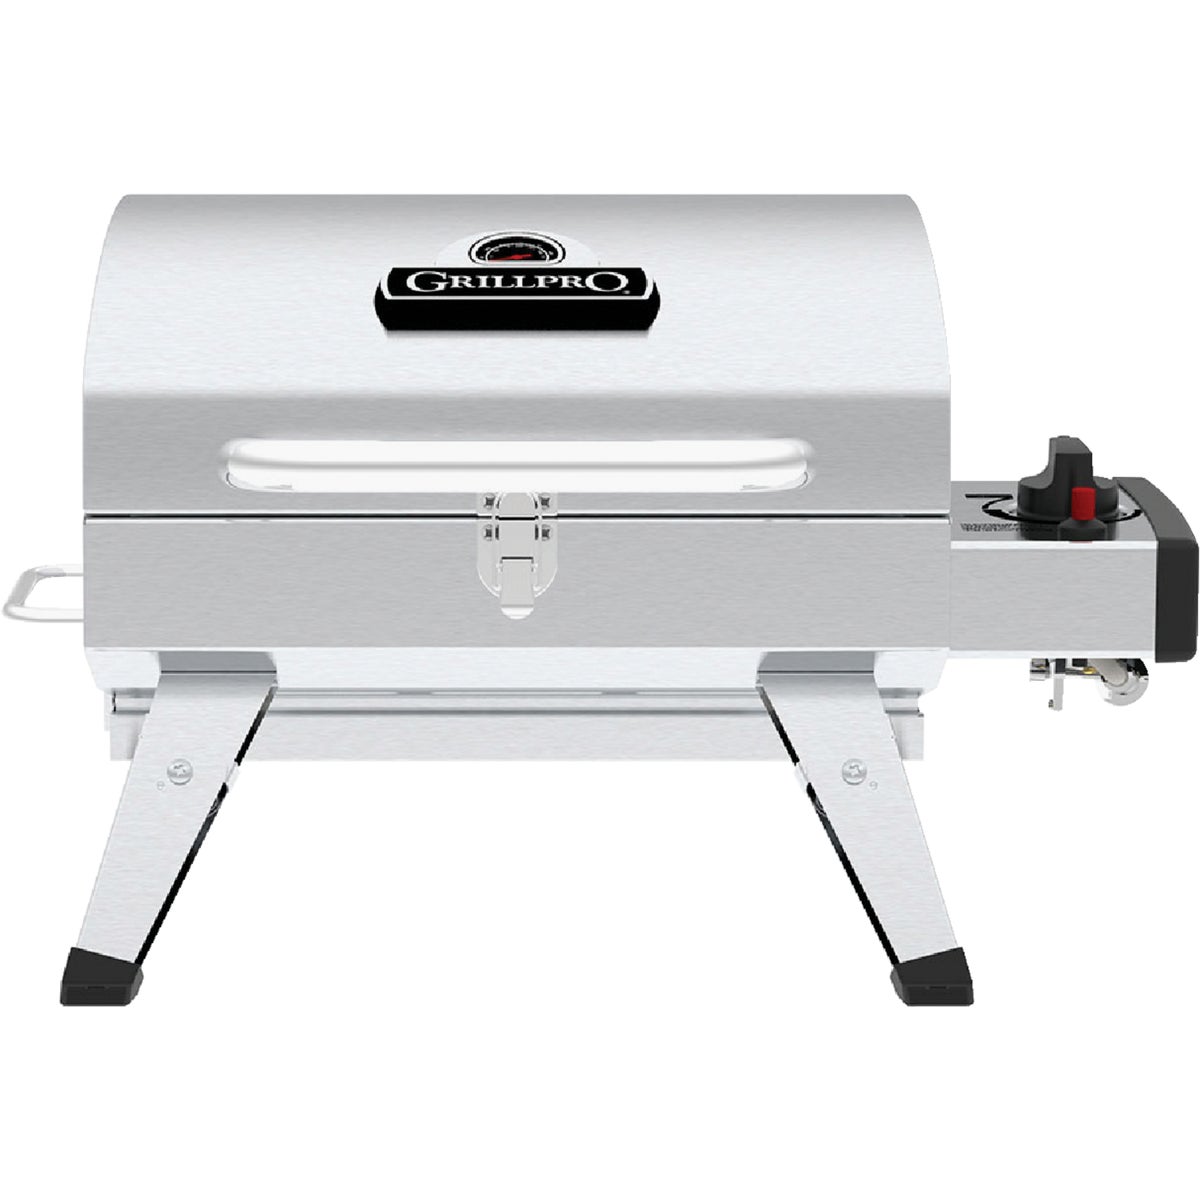 Item 801138, Table top, compact gas grill.